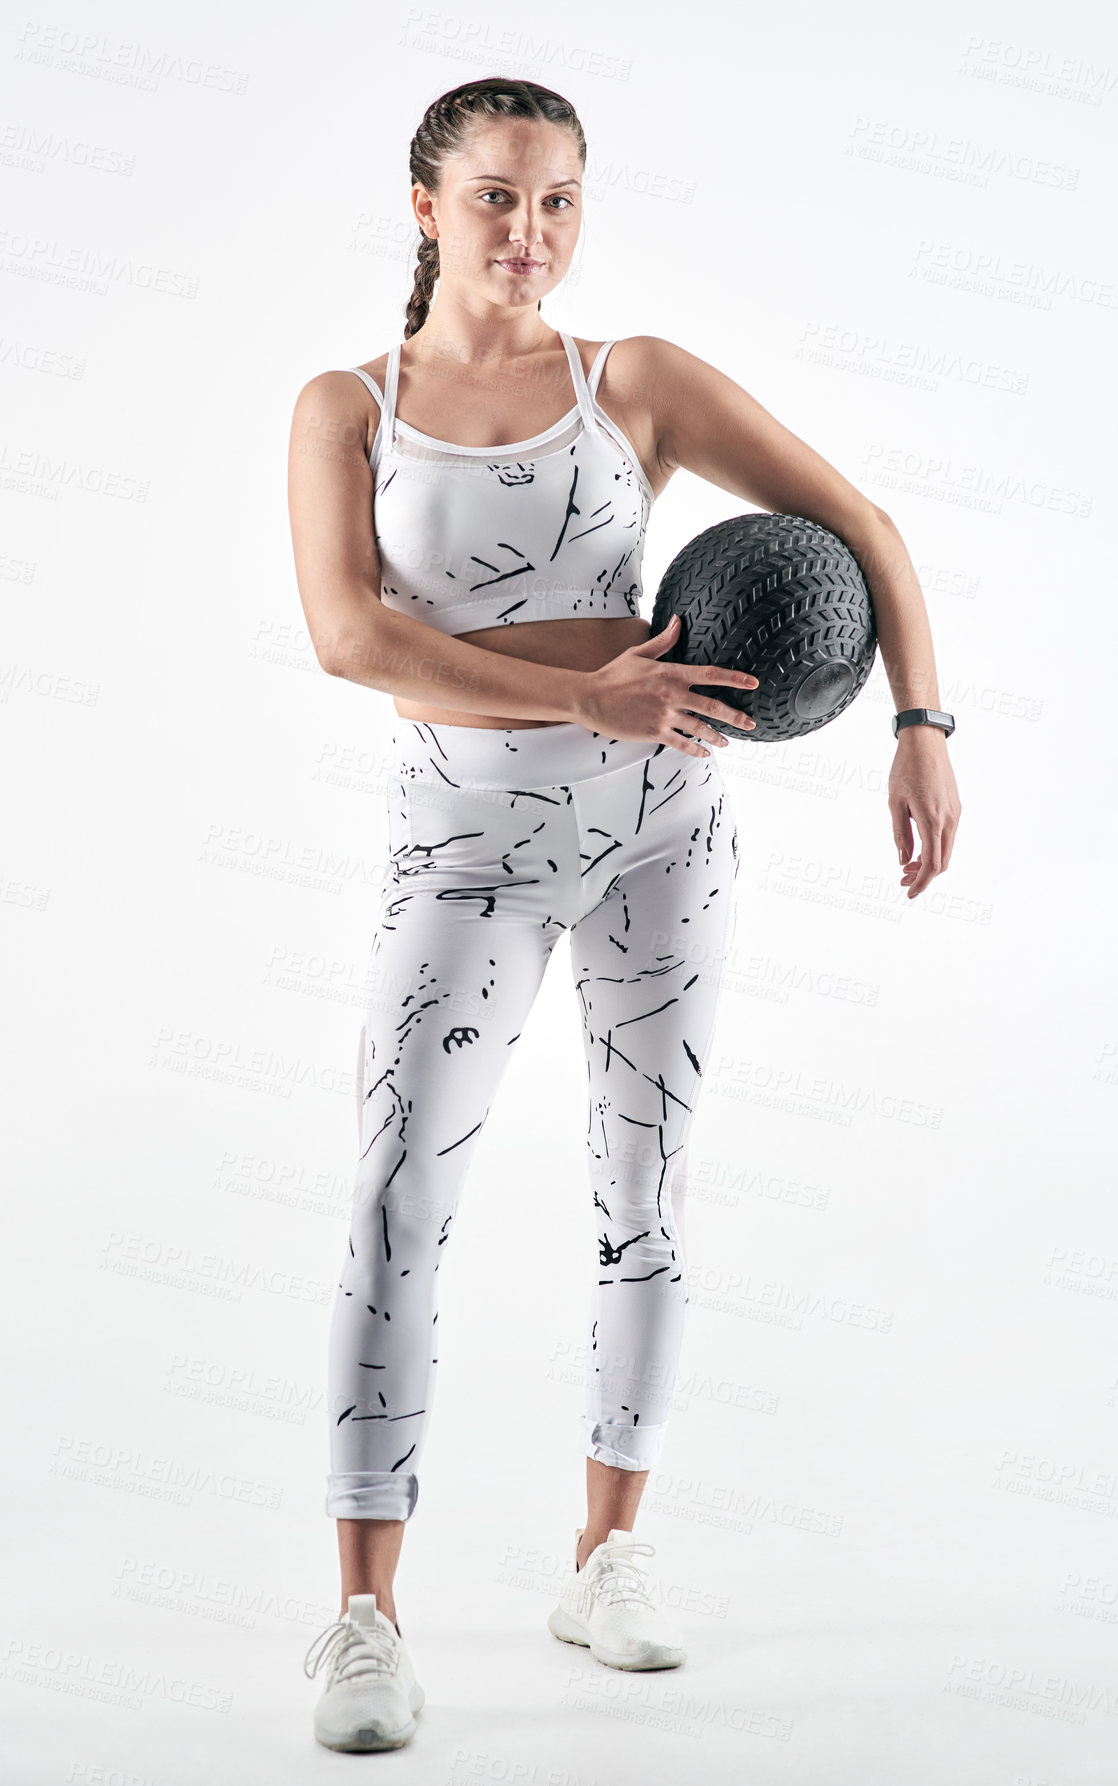 Buy stock photo Studio portrait of a sporty young woman holding an exercise ball against a white background